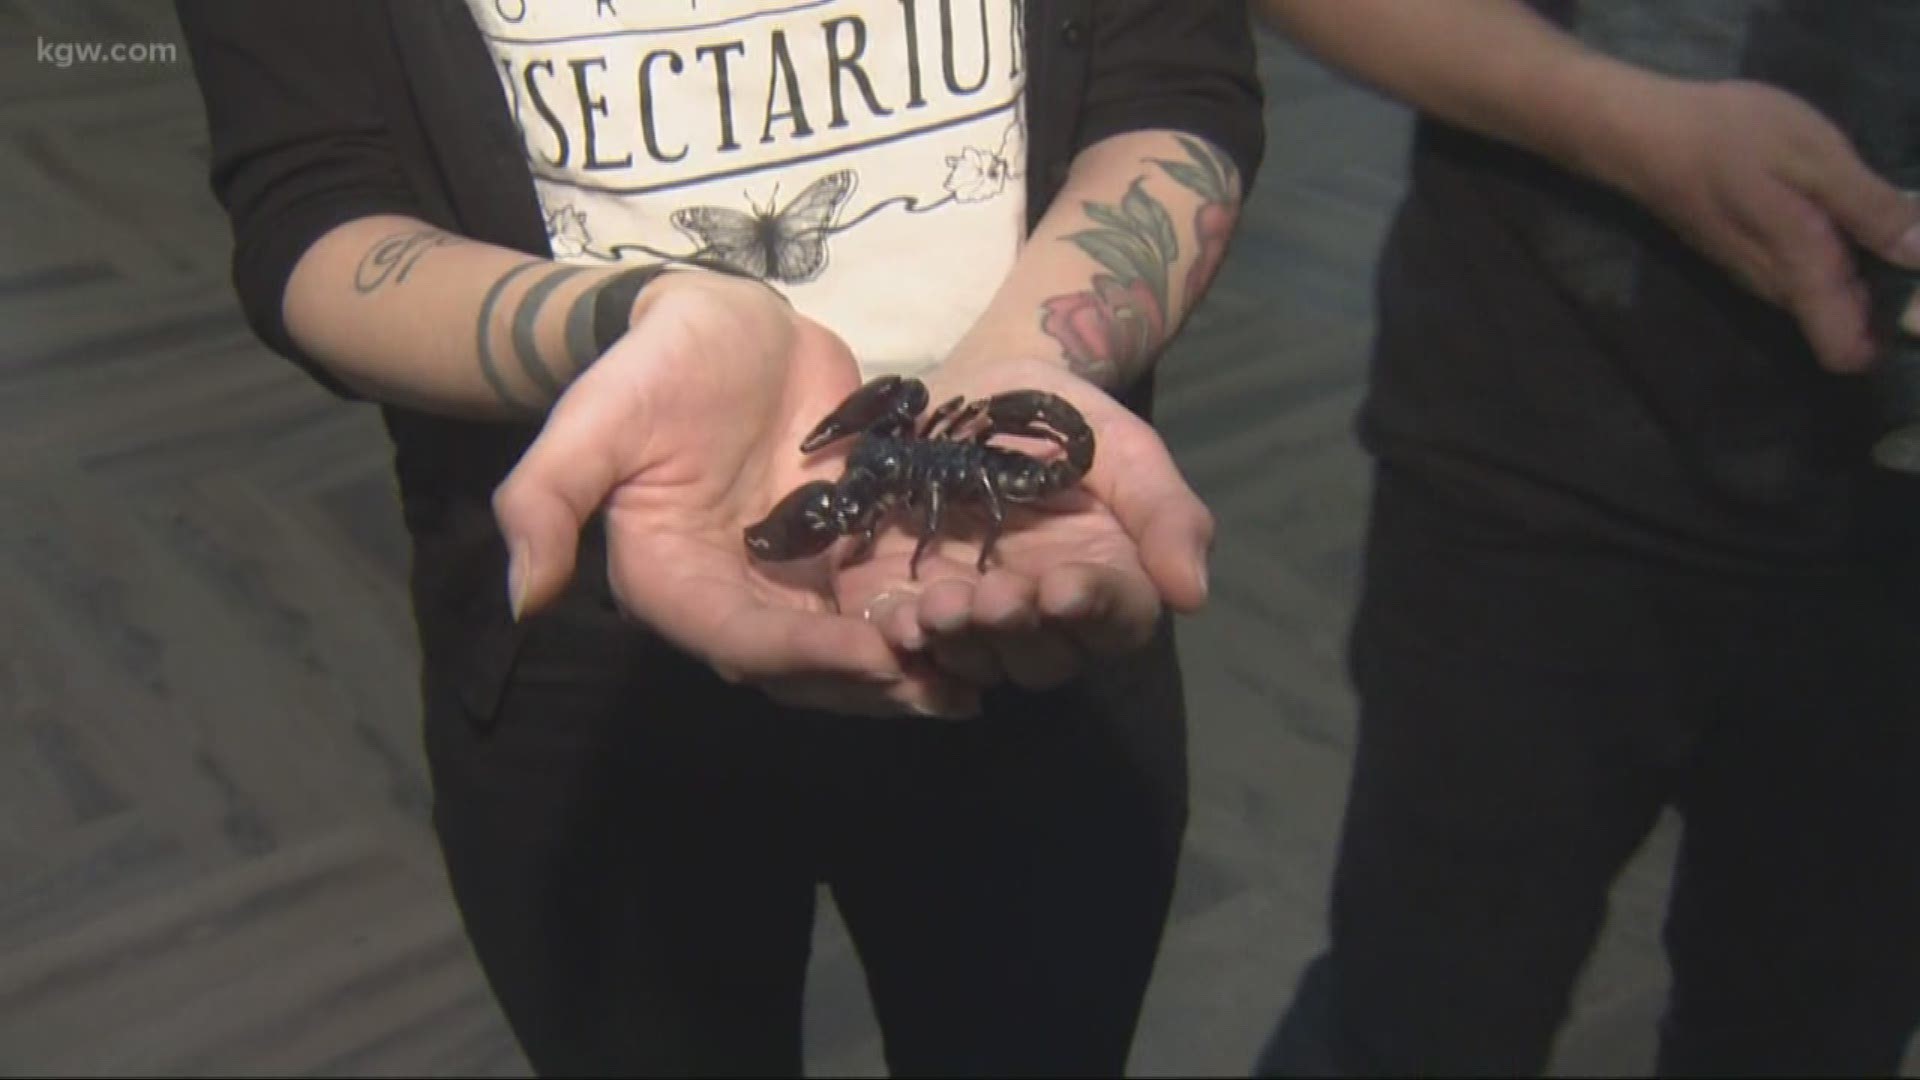 OMSI: After Dark shows off glow-in-the-dark scorpions and other poisonous things.

omsi.edu

#TonightwithCassidy